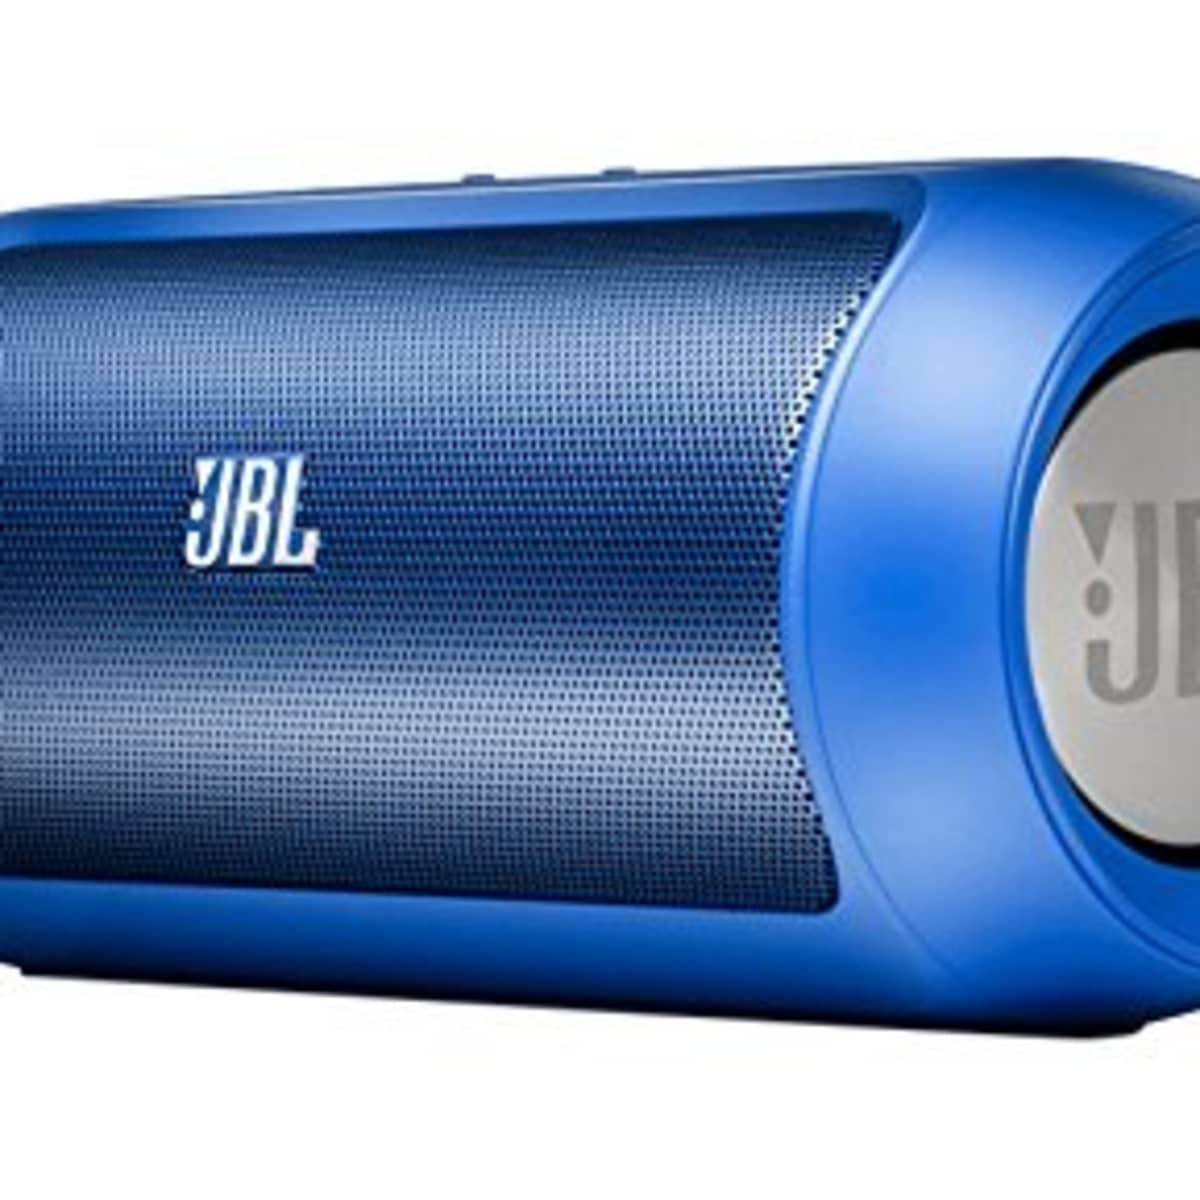 Patronise Selvrespekt Ved Troubleshooting JBL Charge 2 Problems - HubPages